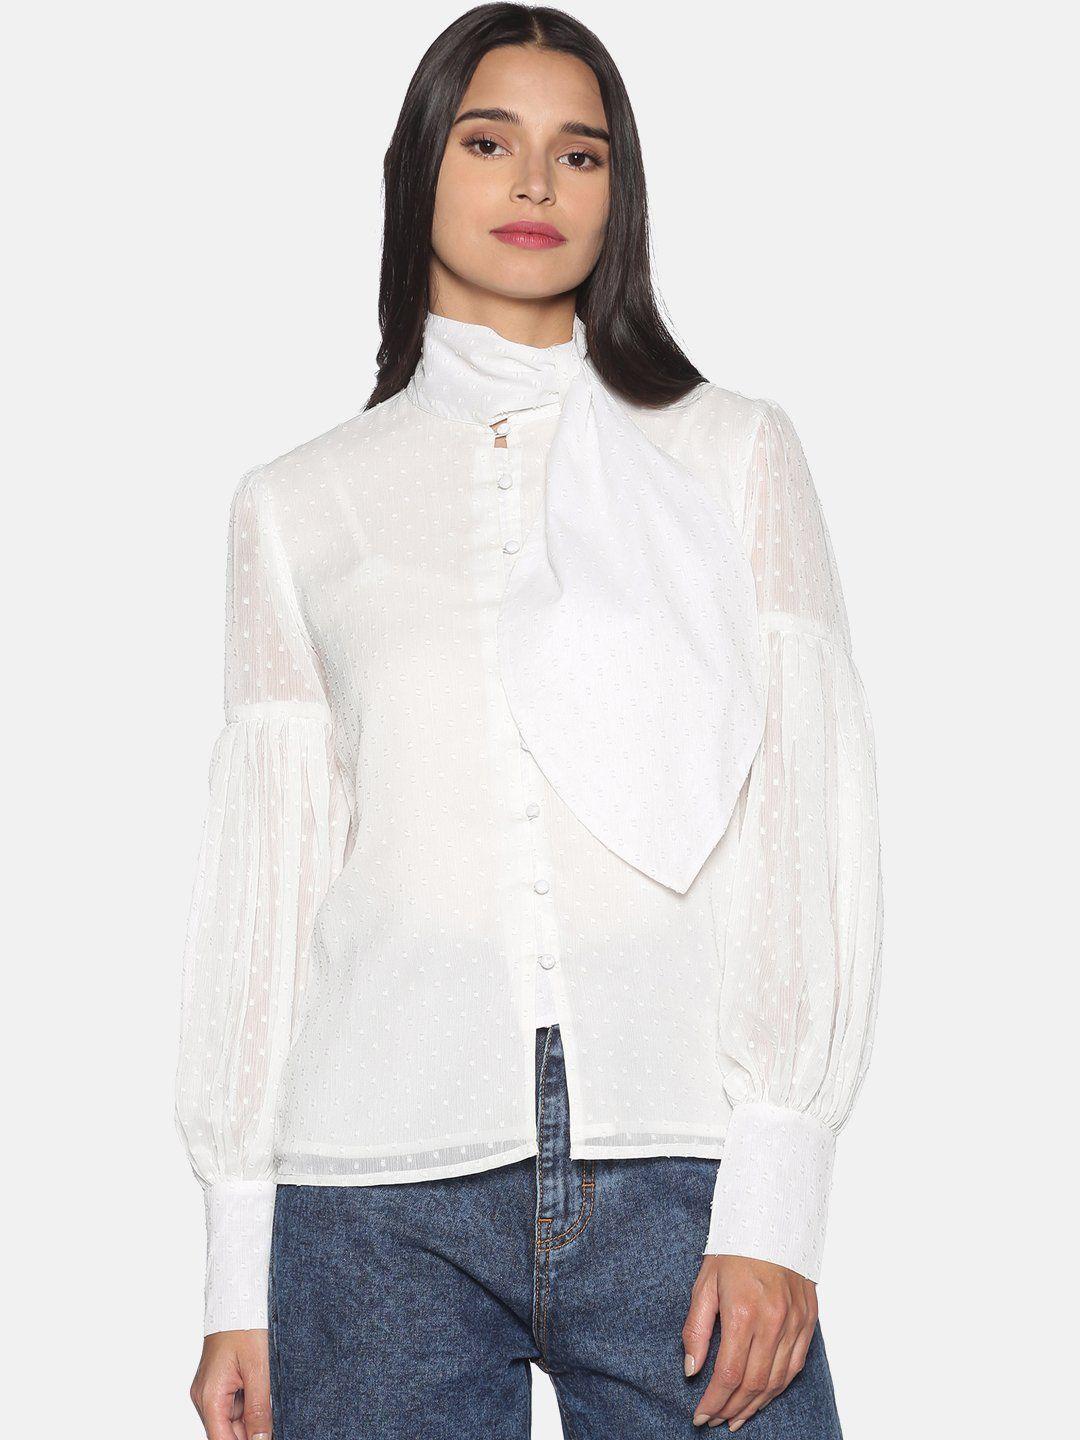 here&now women white casual button shirt